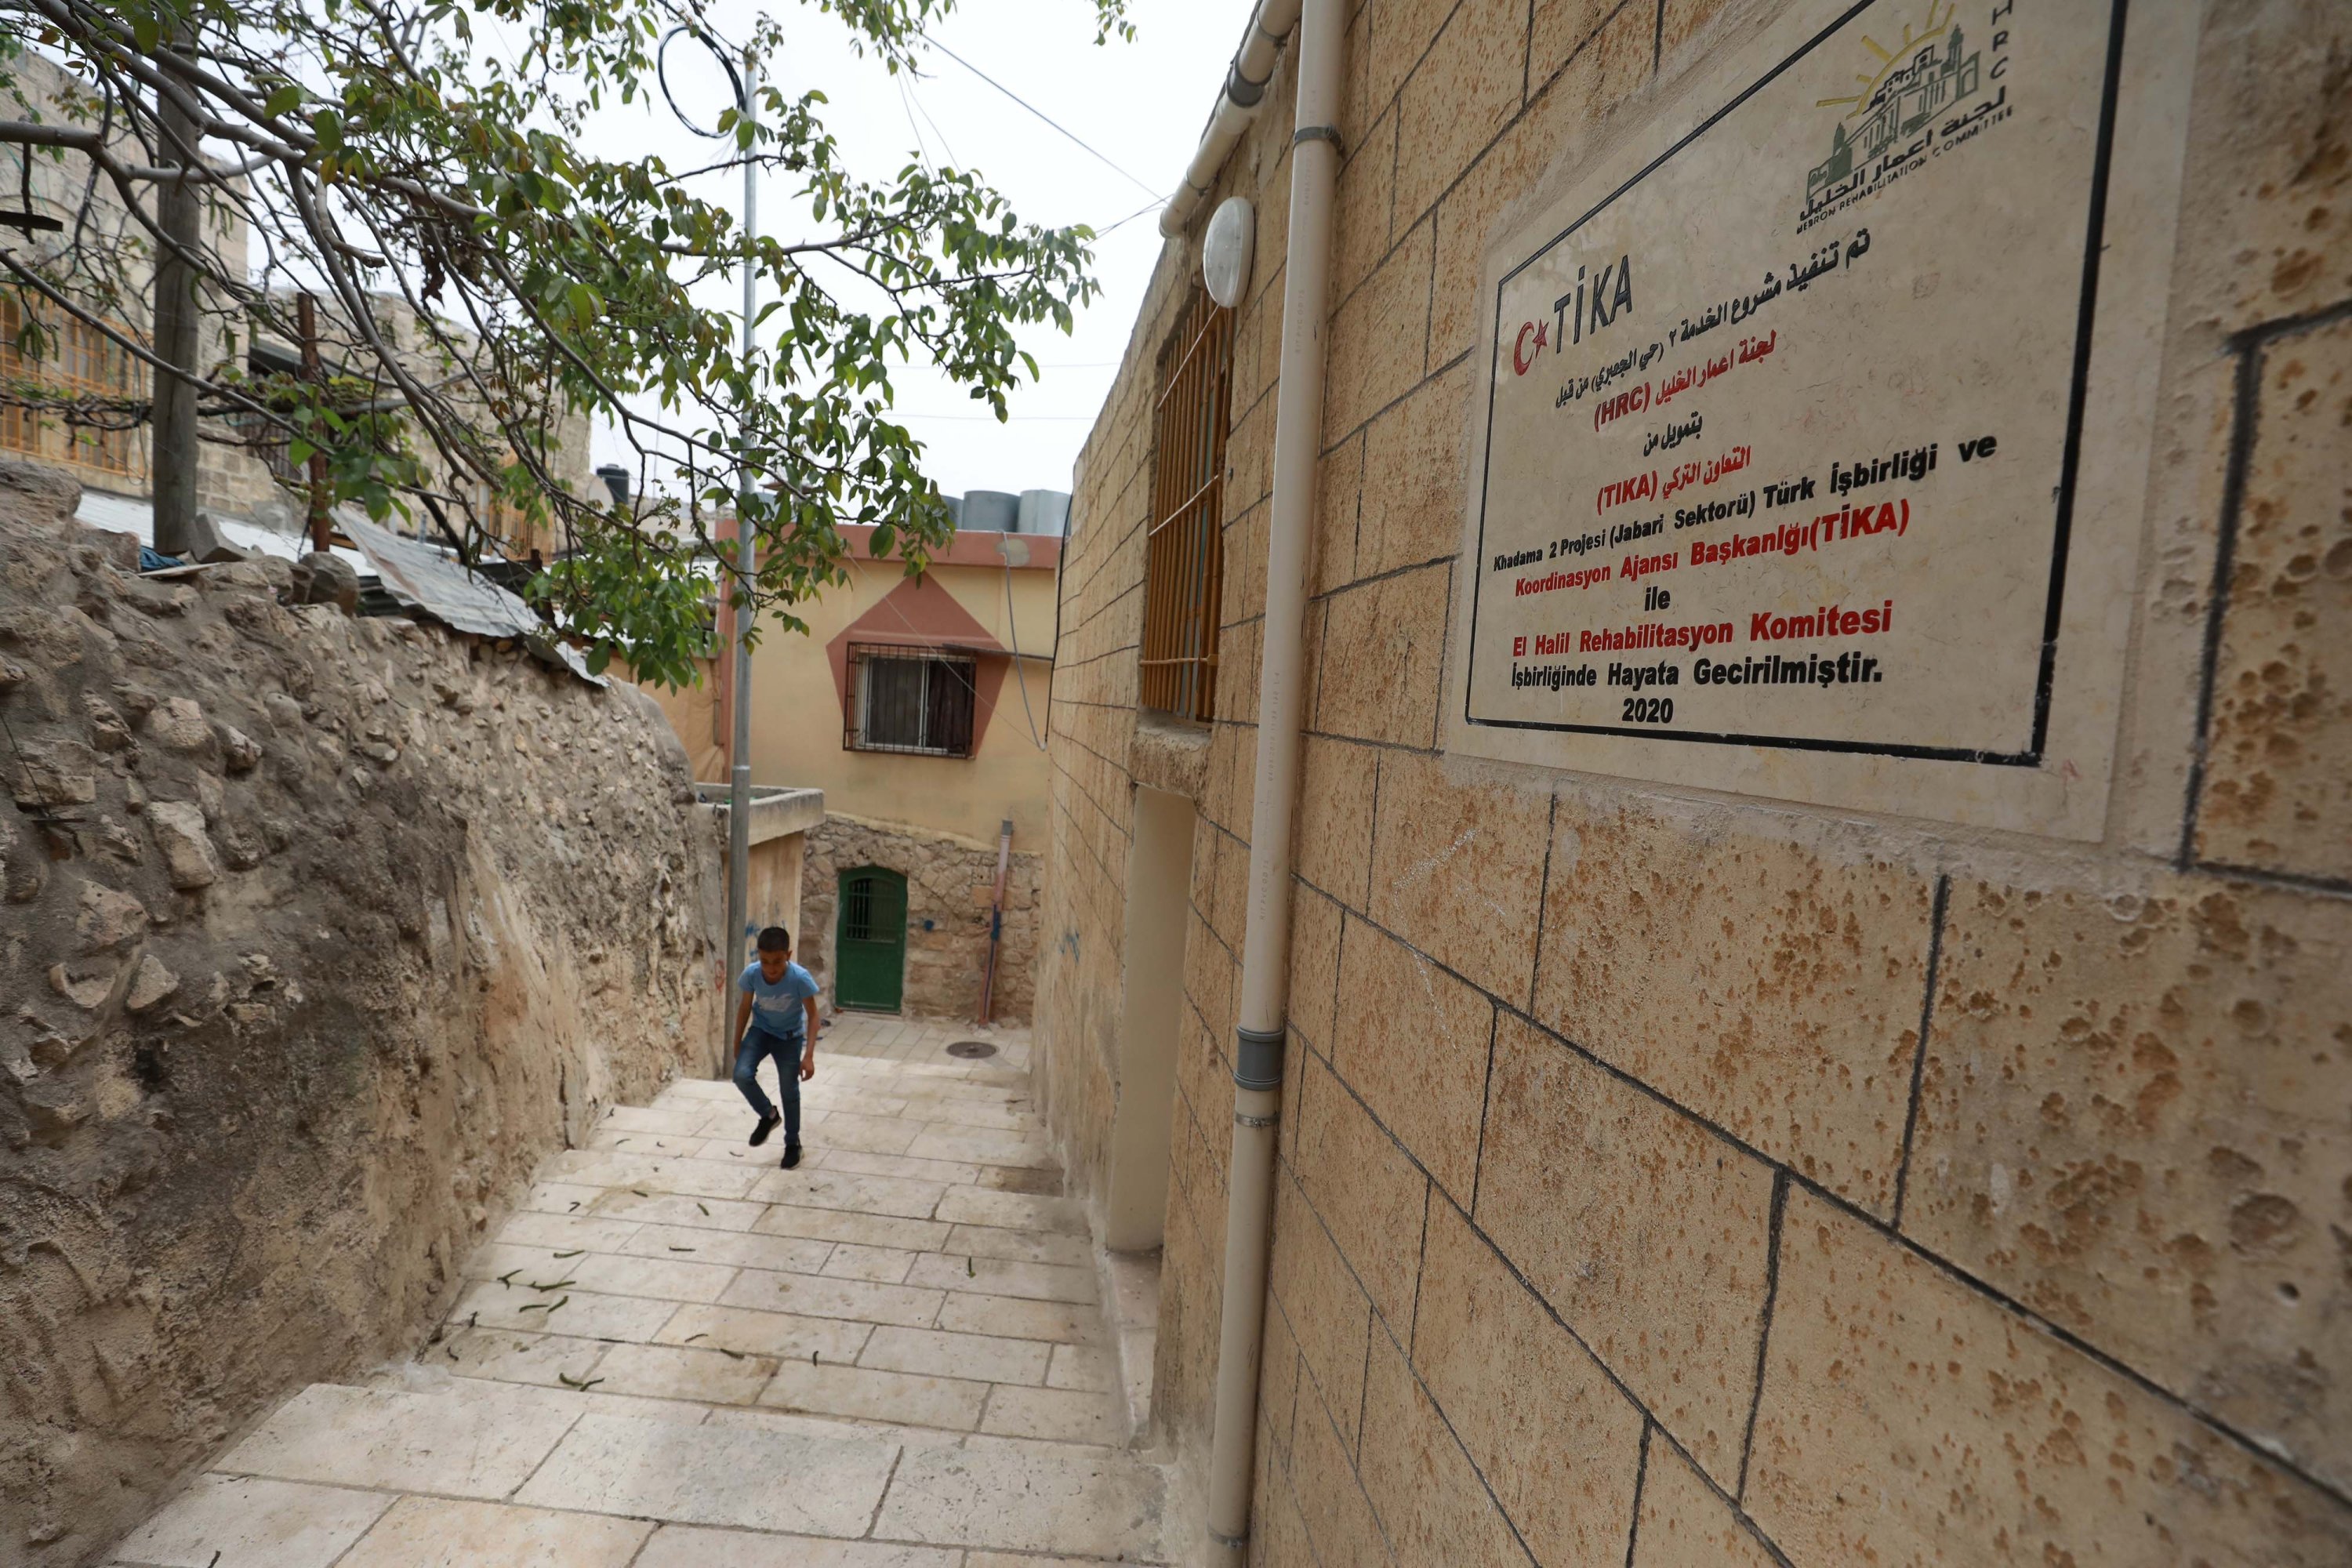 A plaque indicates a project by the Turkish Cooperation and Coordination Agency (TIKA) and the Hebron Rehabilitation Committee to restore historical houses in Hebron, Palestine, April 30, 2021. (AA Photo)